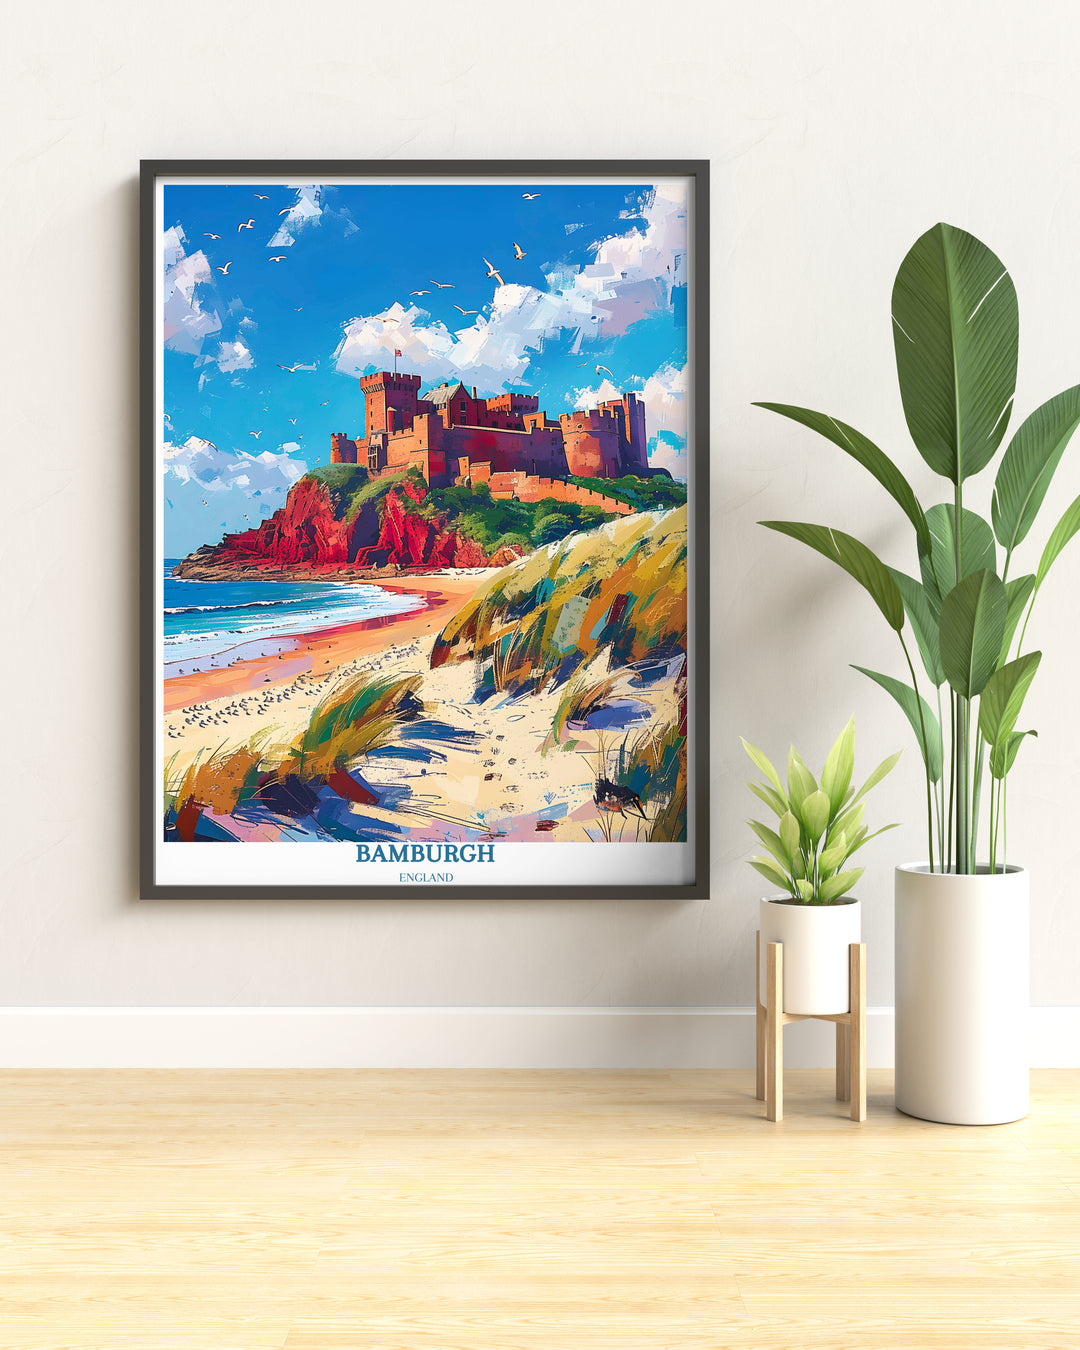 Explore the historical charm of England through the intricate details of Bamburgh Castle showcased in this captivating wall art.